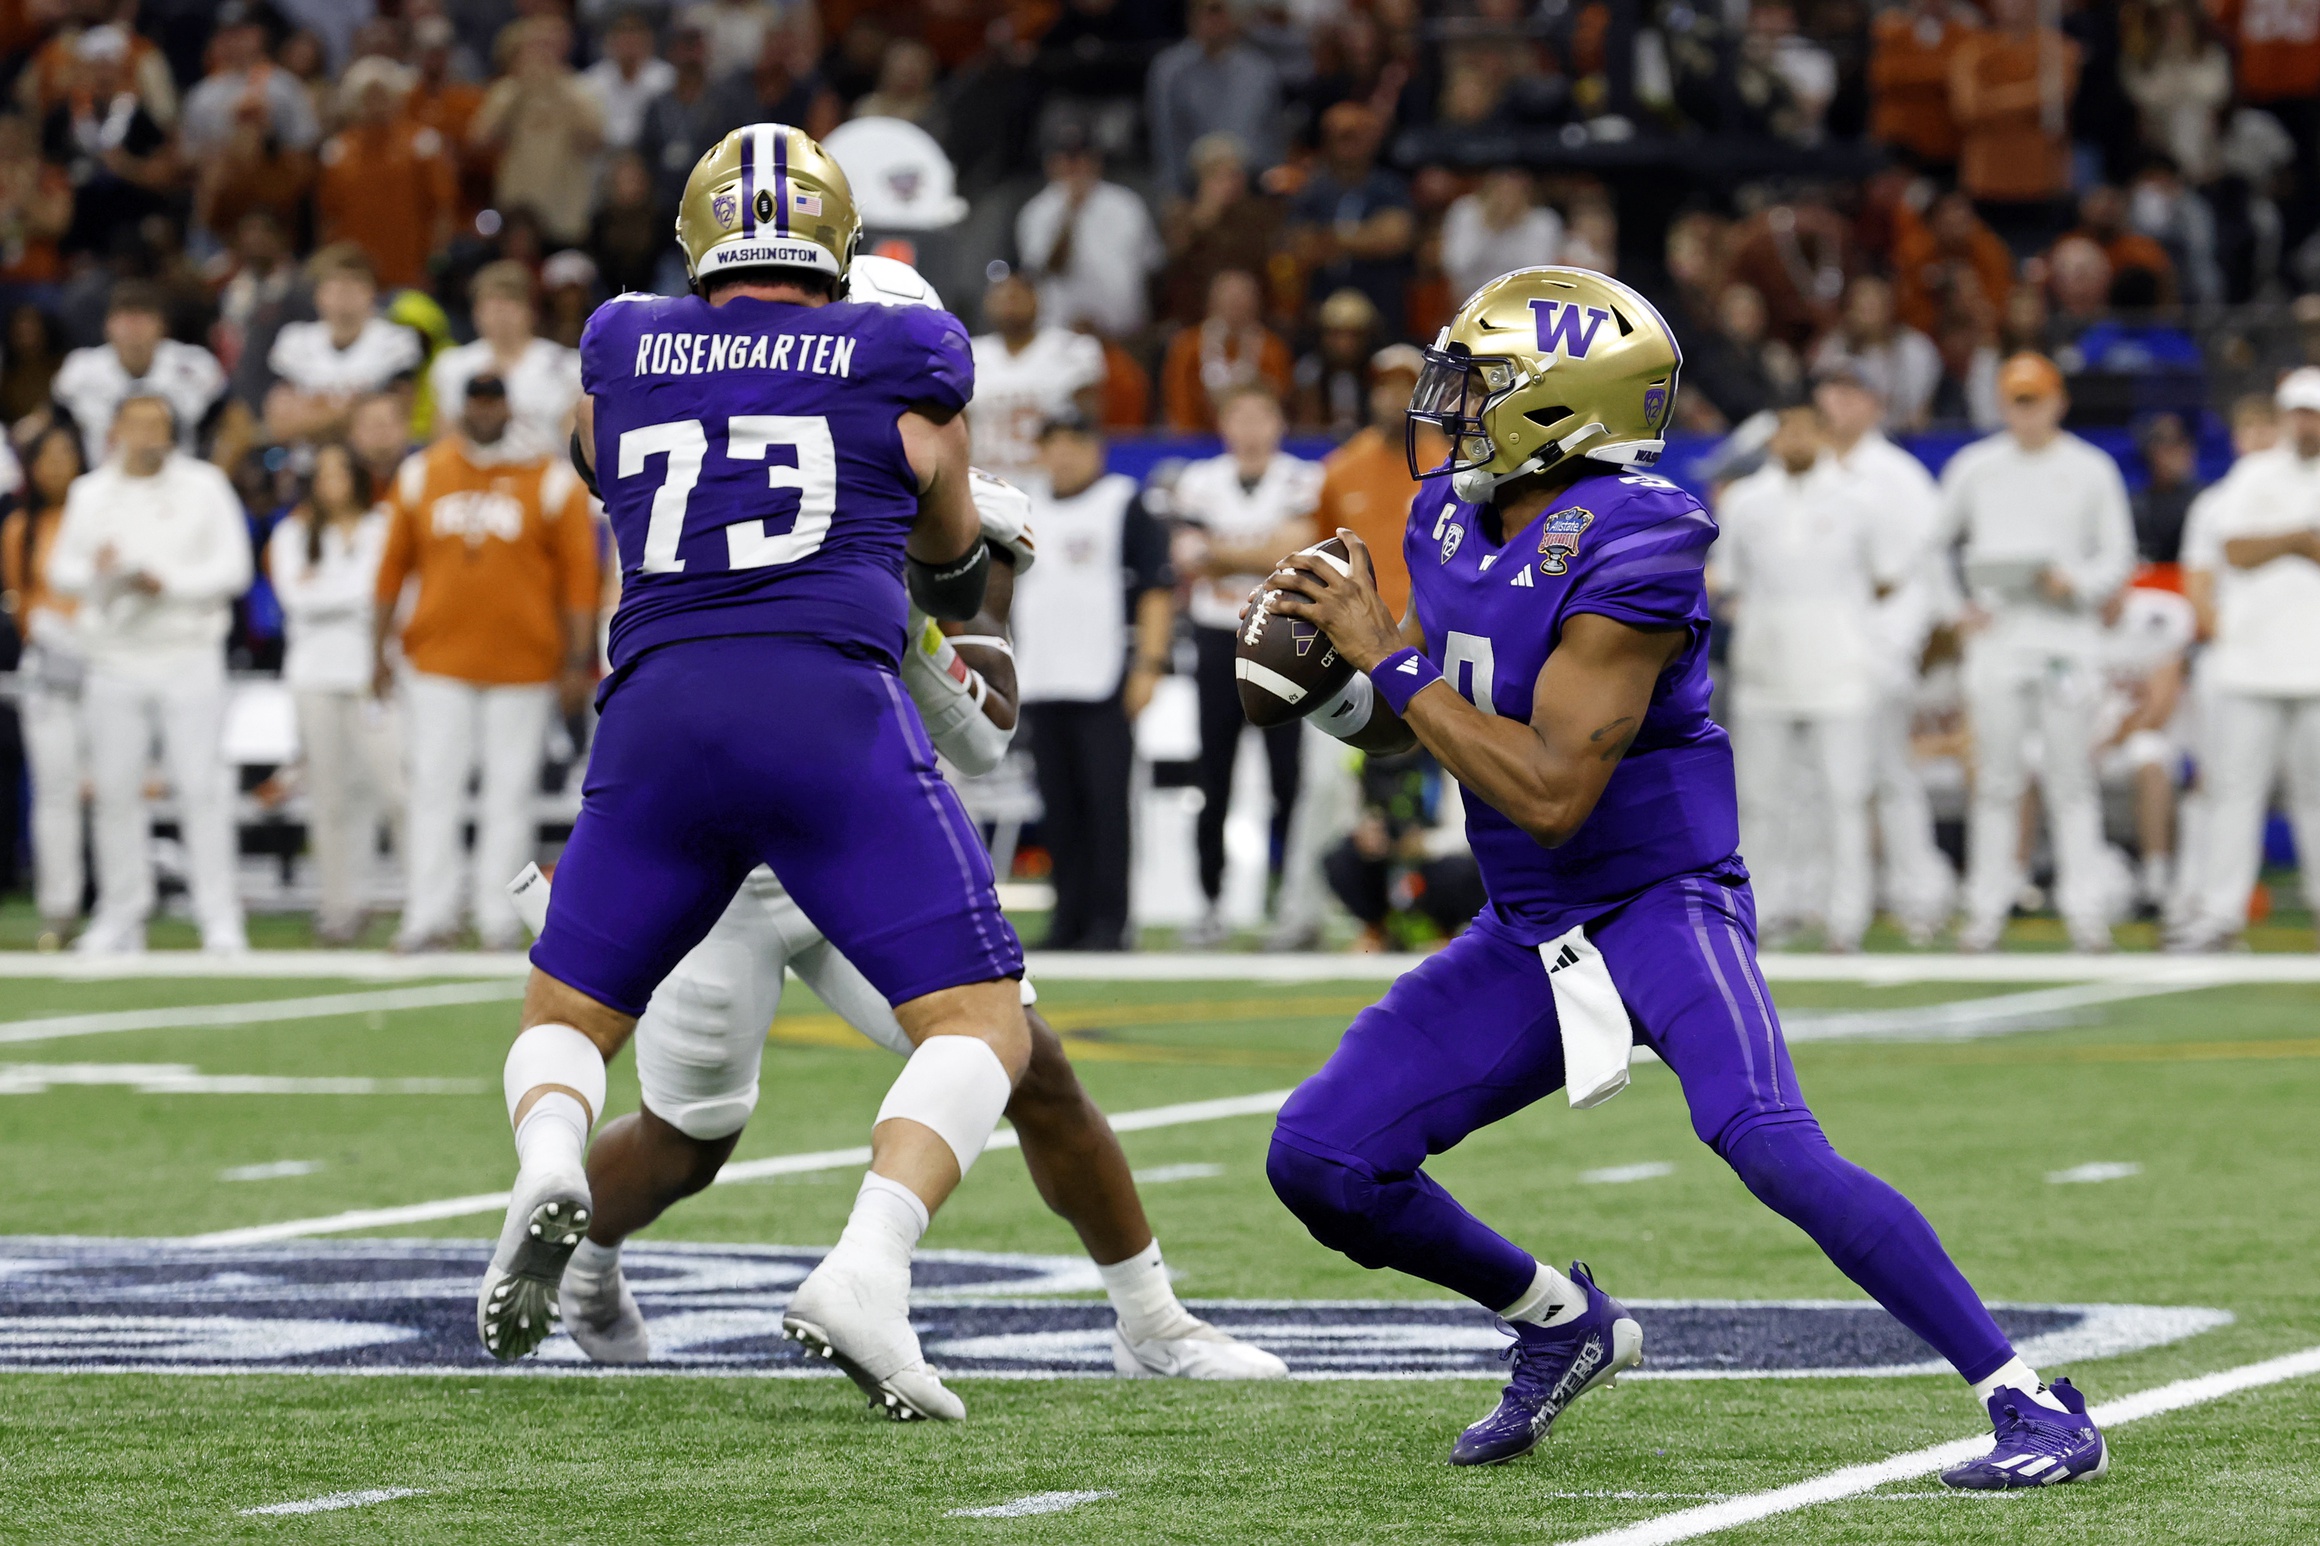 Jan 1, 2024; New Orleans, LA, USA; Washington Huskies quarterback Michael Penix Jr. (9) looks to pass the ball against the Texas Longhorns during the second half of the 2024 Sugar Bowl college football playoff semifinal game at Caesars Superdome.